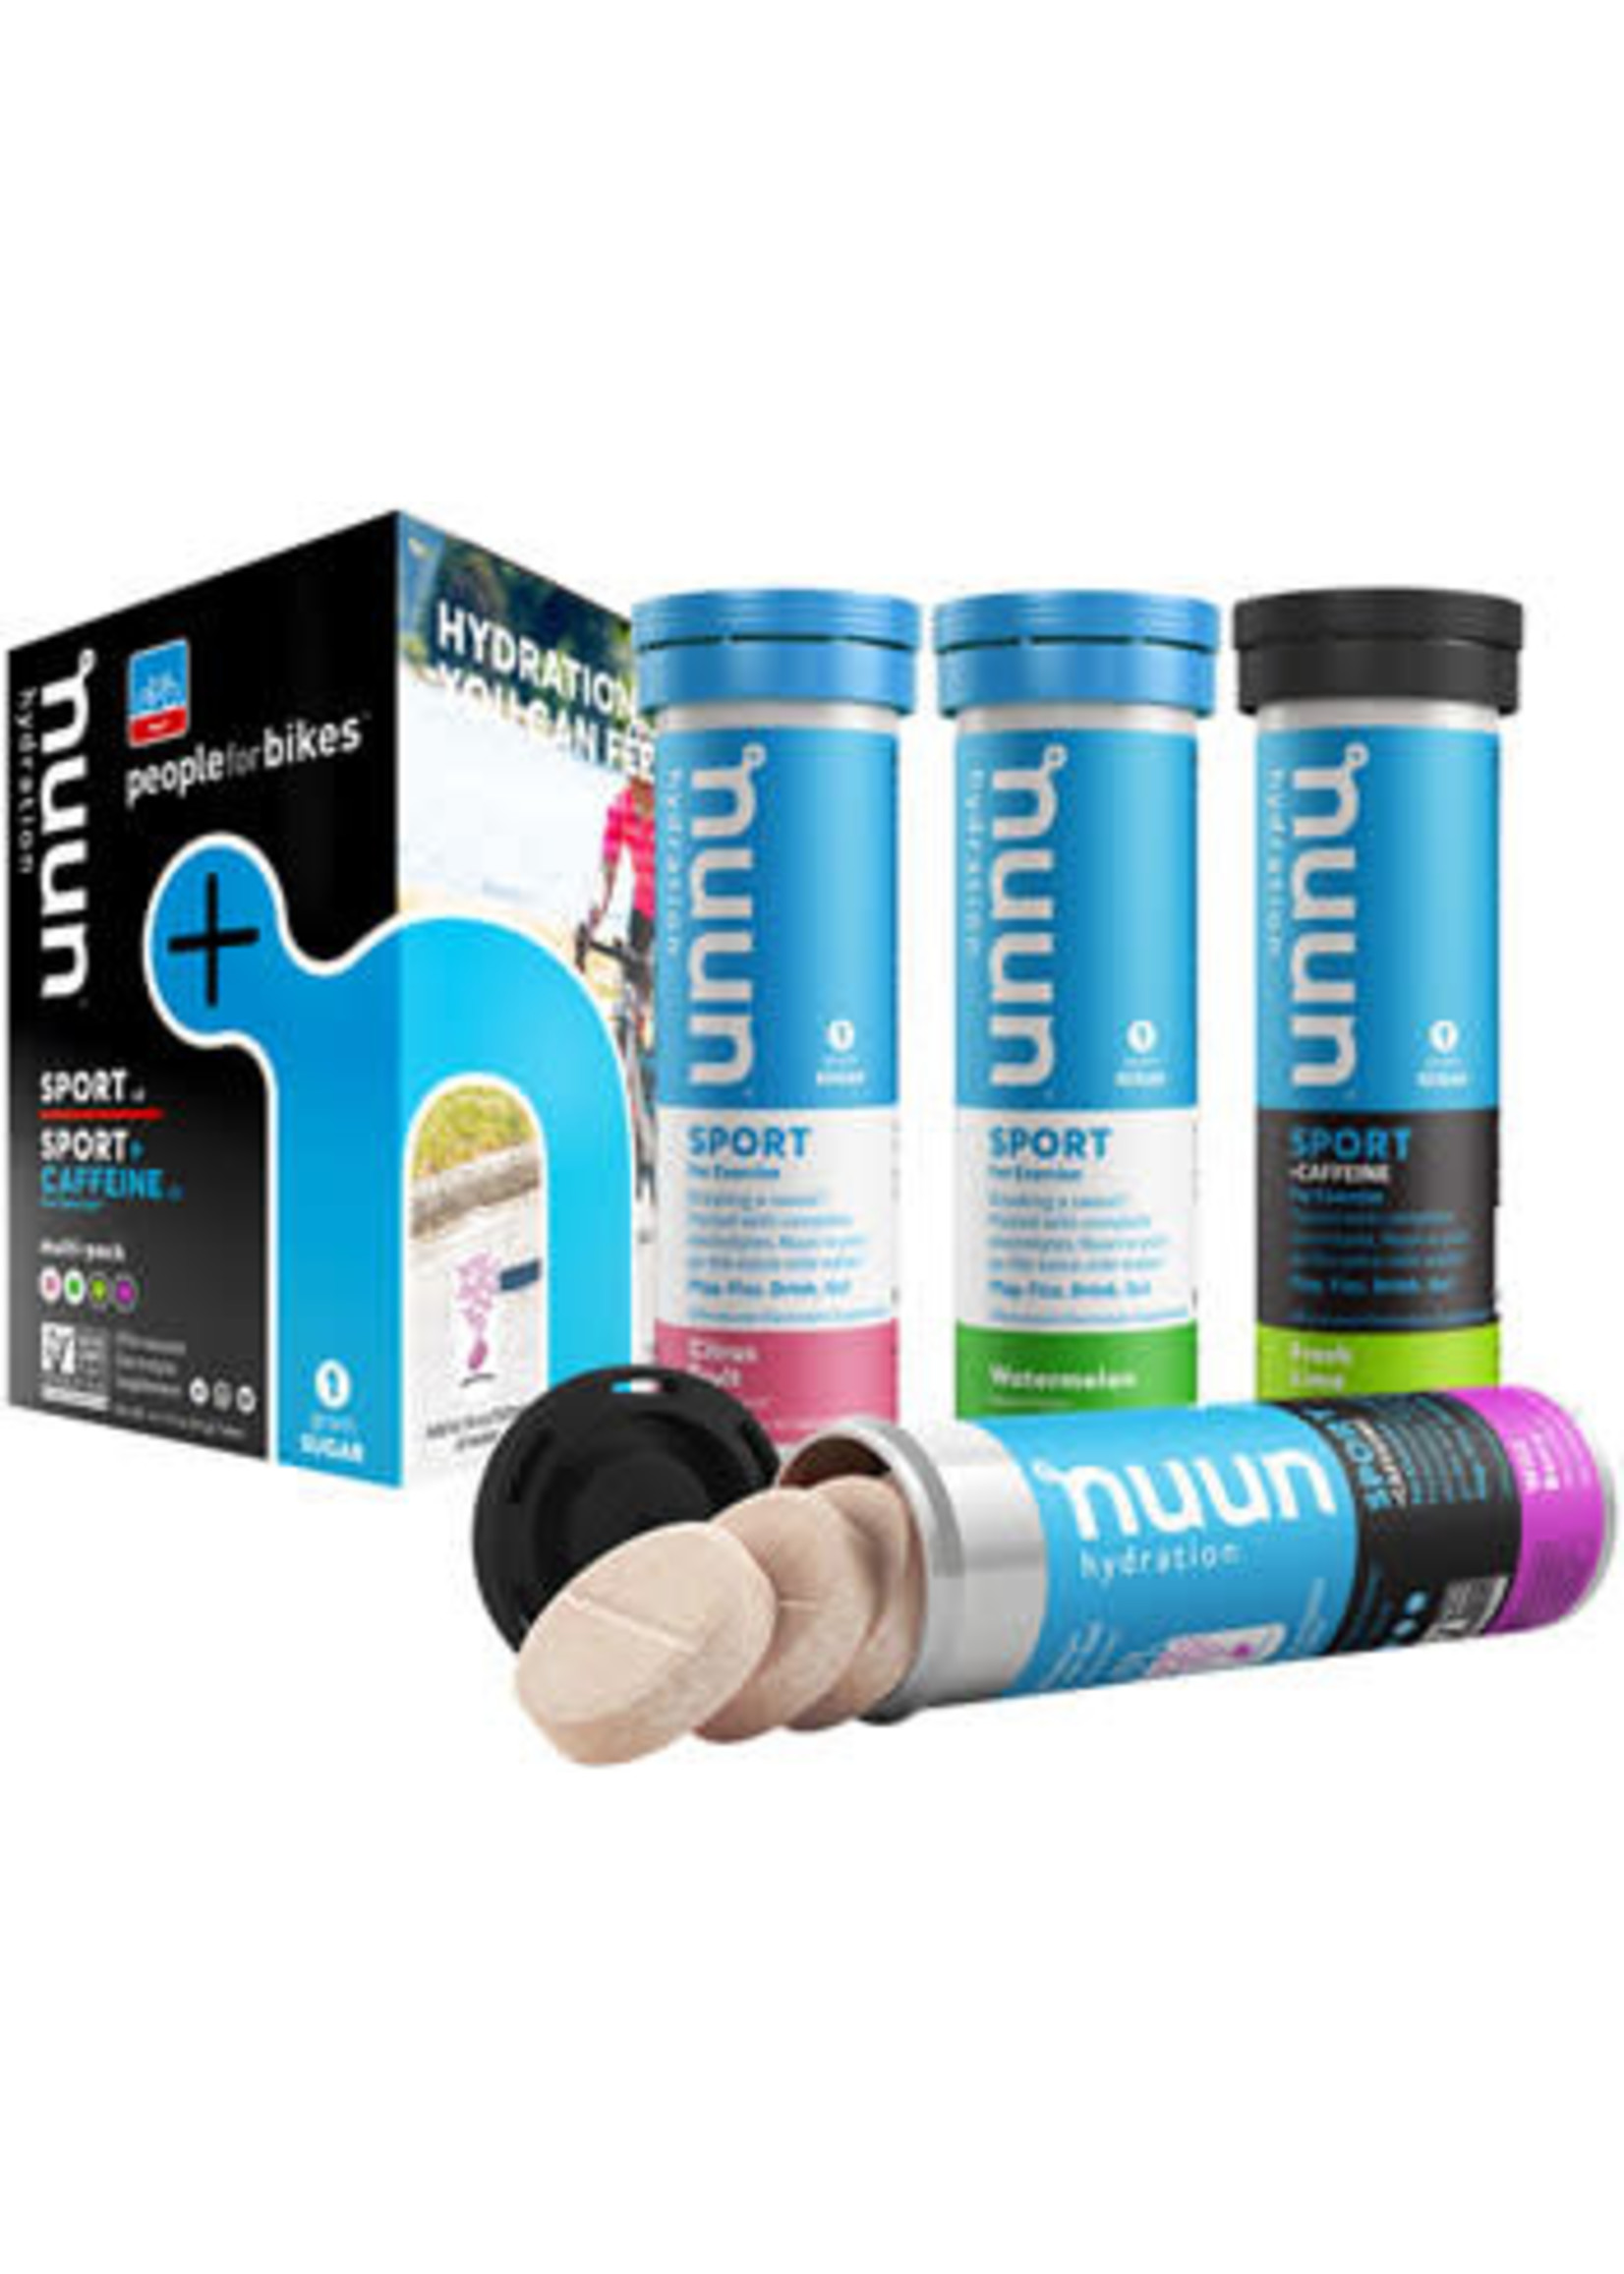 Nuun Nuun Sport Hydration Tablets: People for Bikes Mixed Pack, Box of 4 Tubes